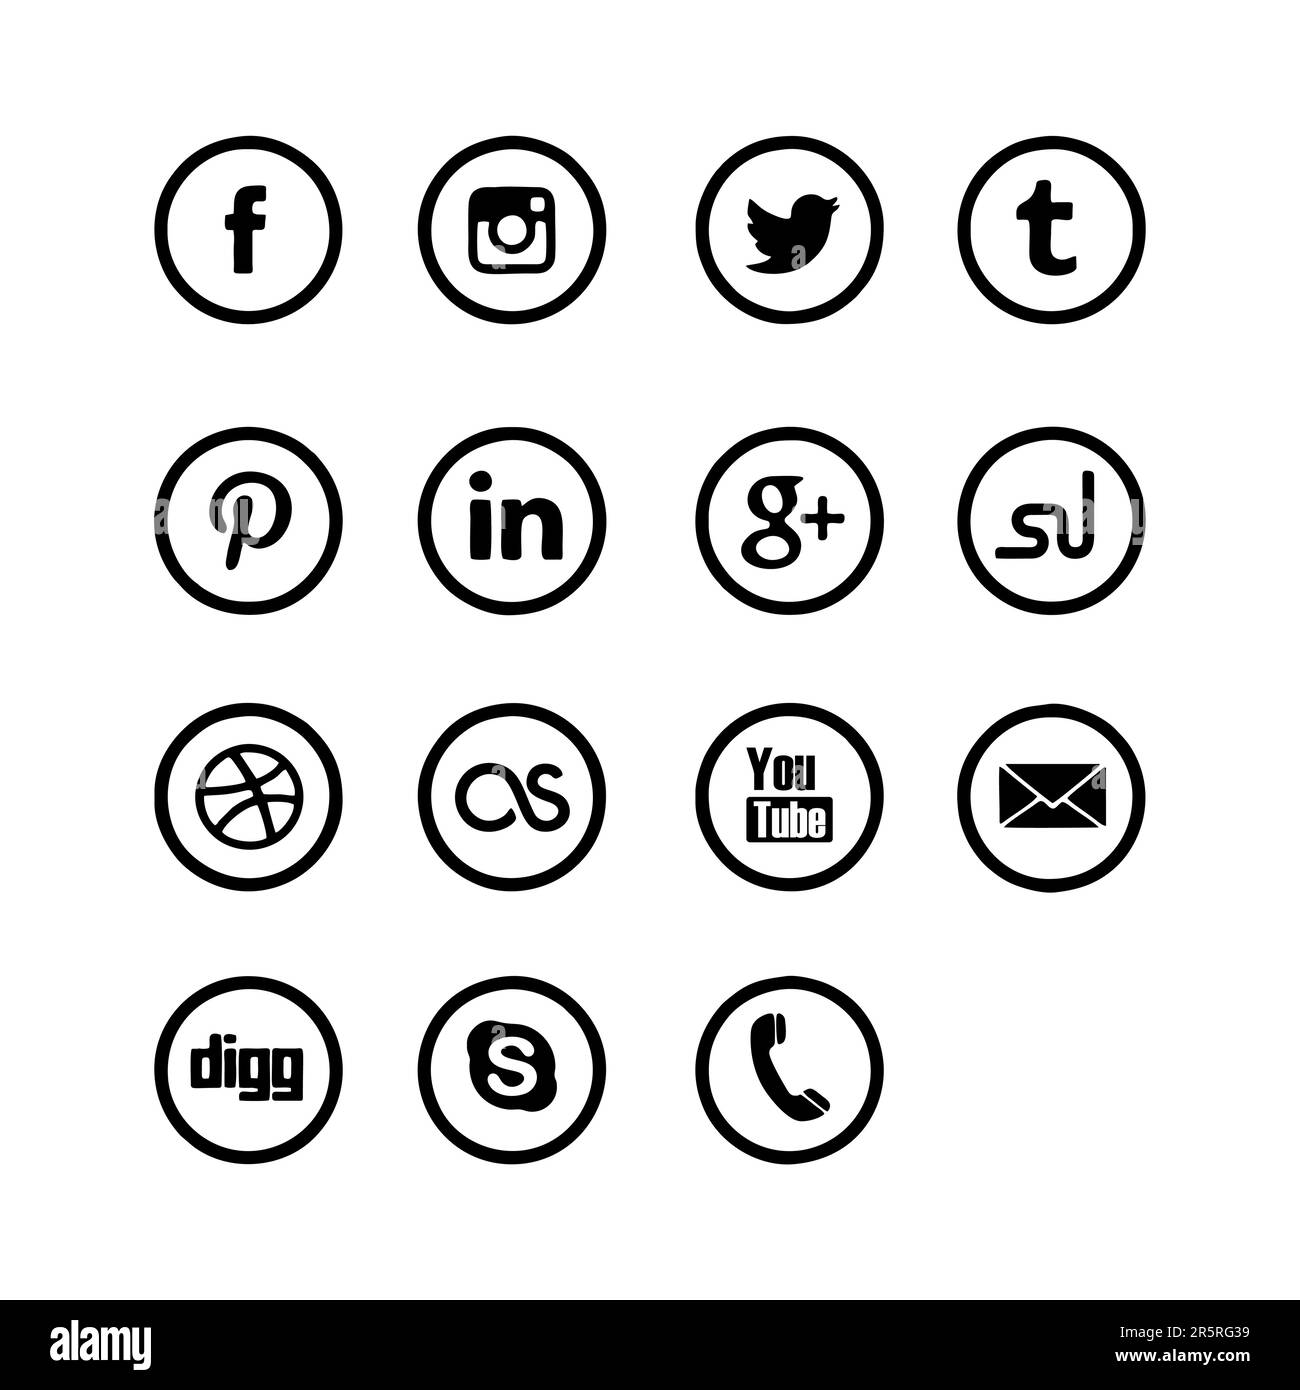 Icon set of popular social applications with rounded corners. Social media icons modern design on transparent background for your design. Stock Vector